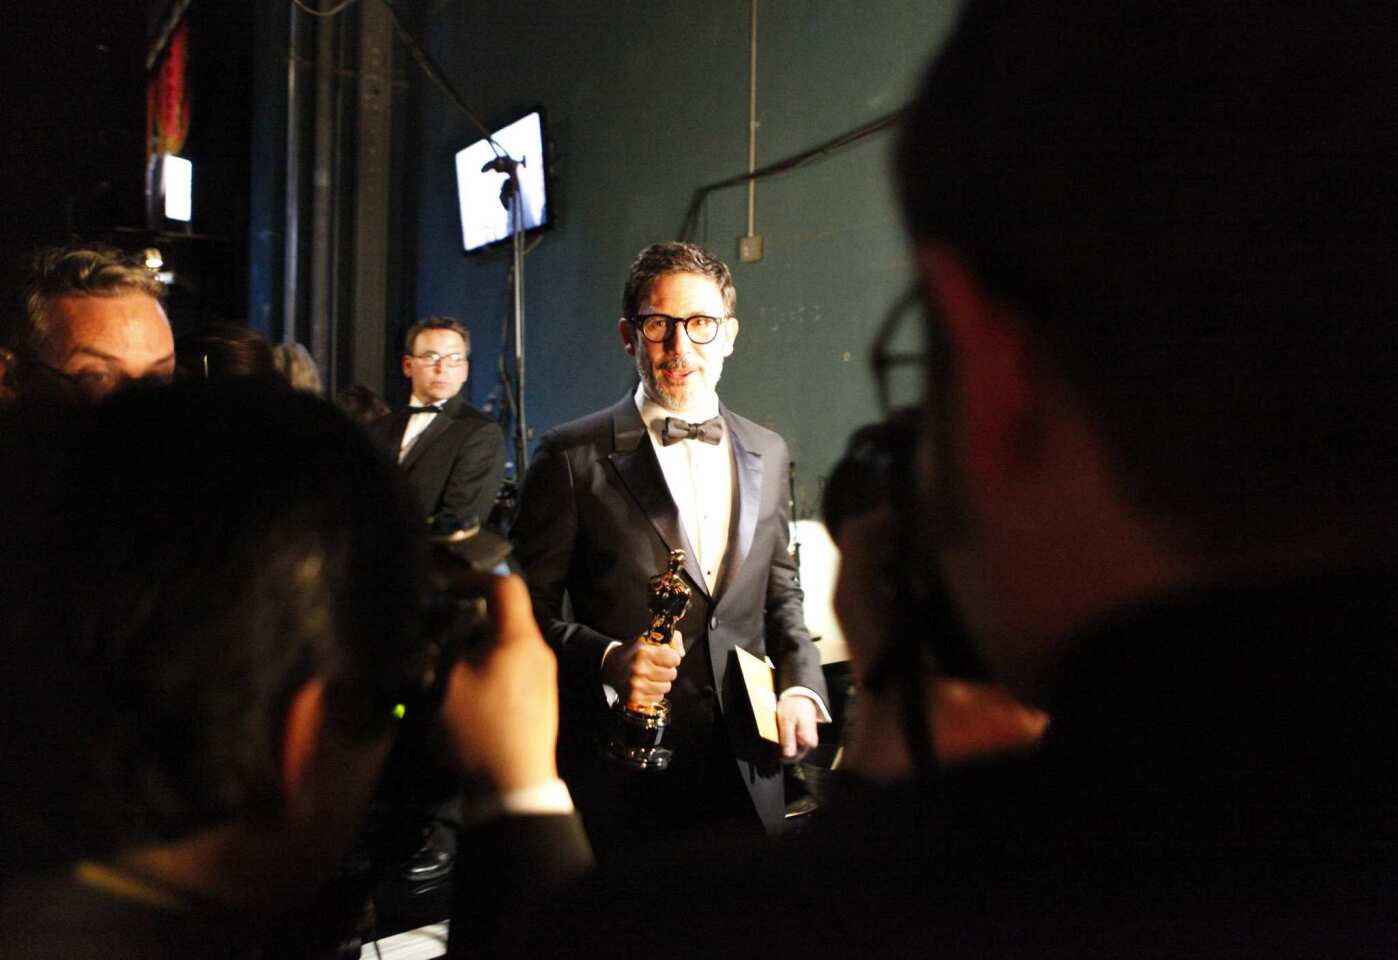 The best director winner ("The Arist") is caught between the stage and the press room at the 2012 Academy Awards in Hollywood.